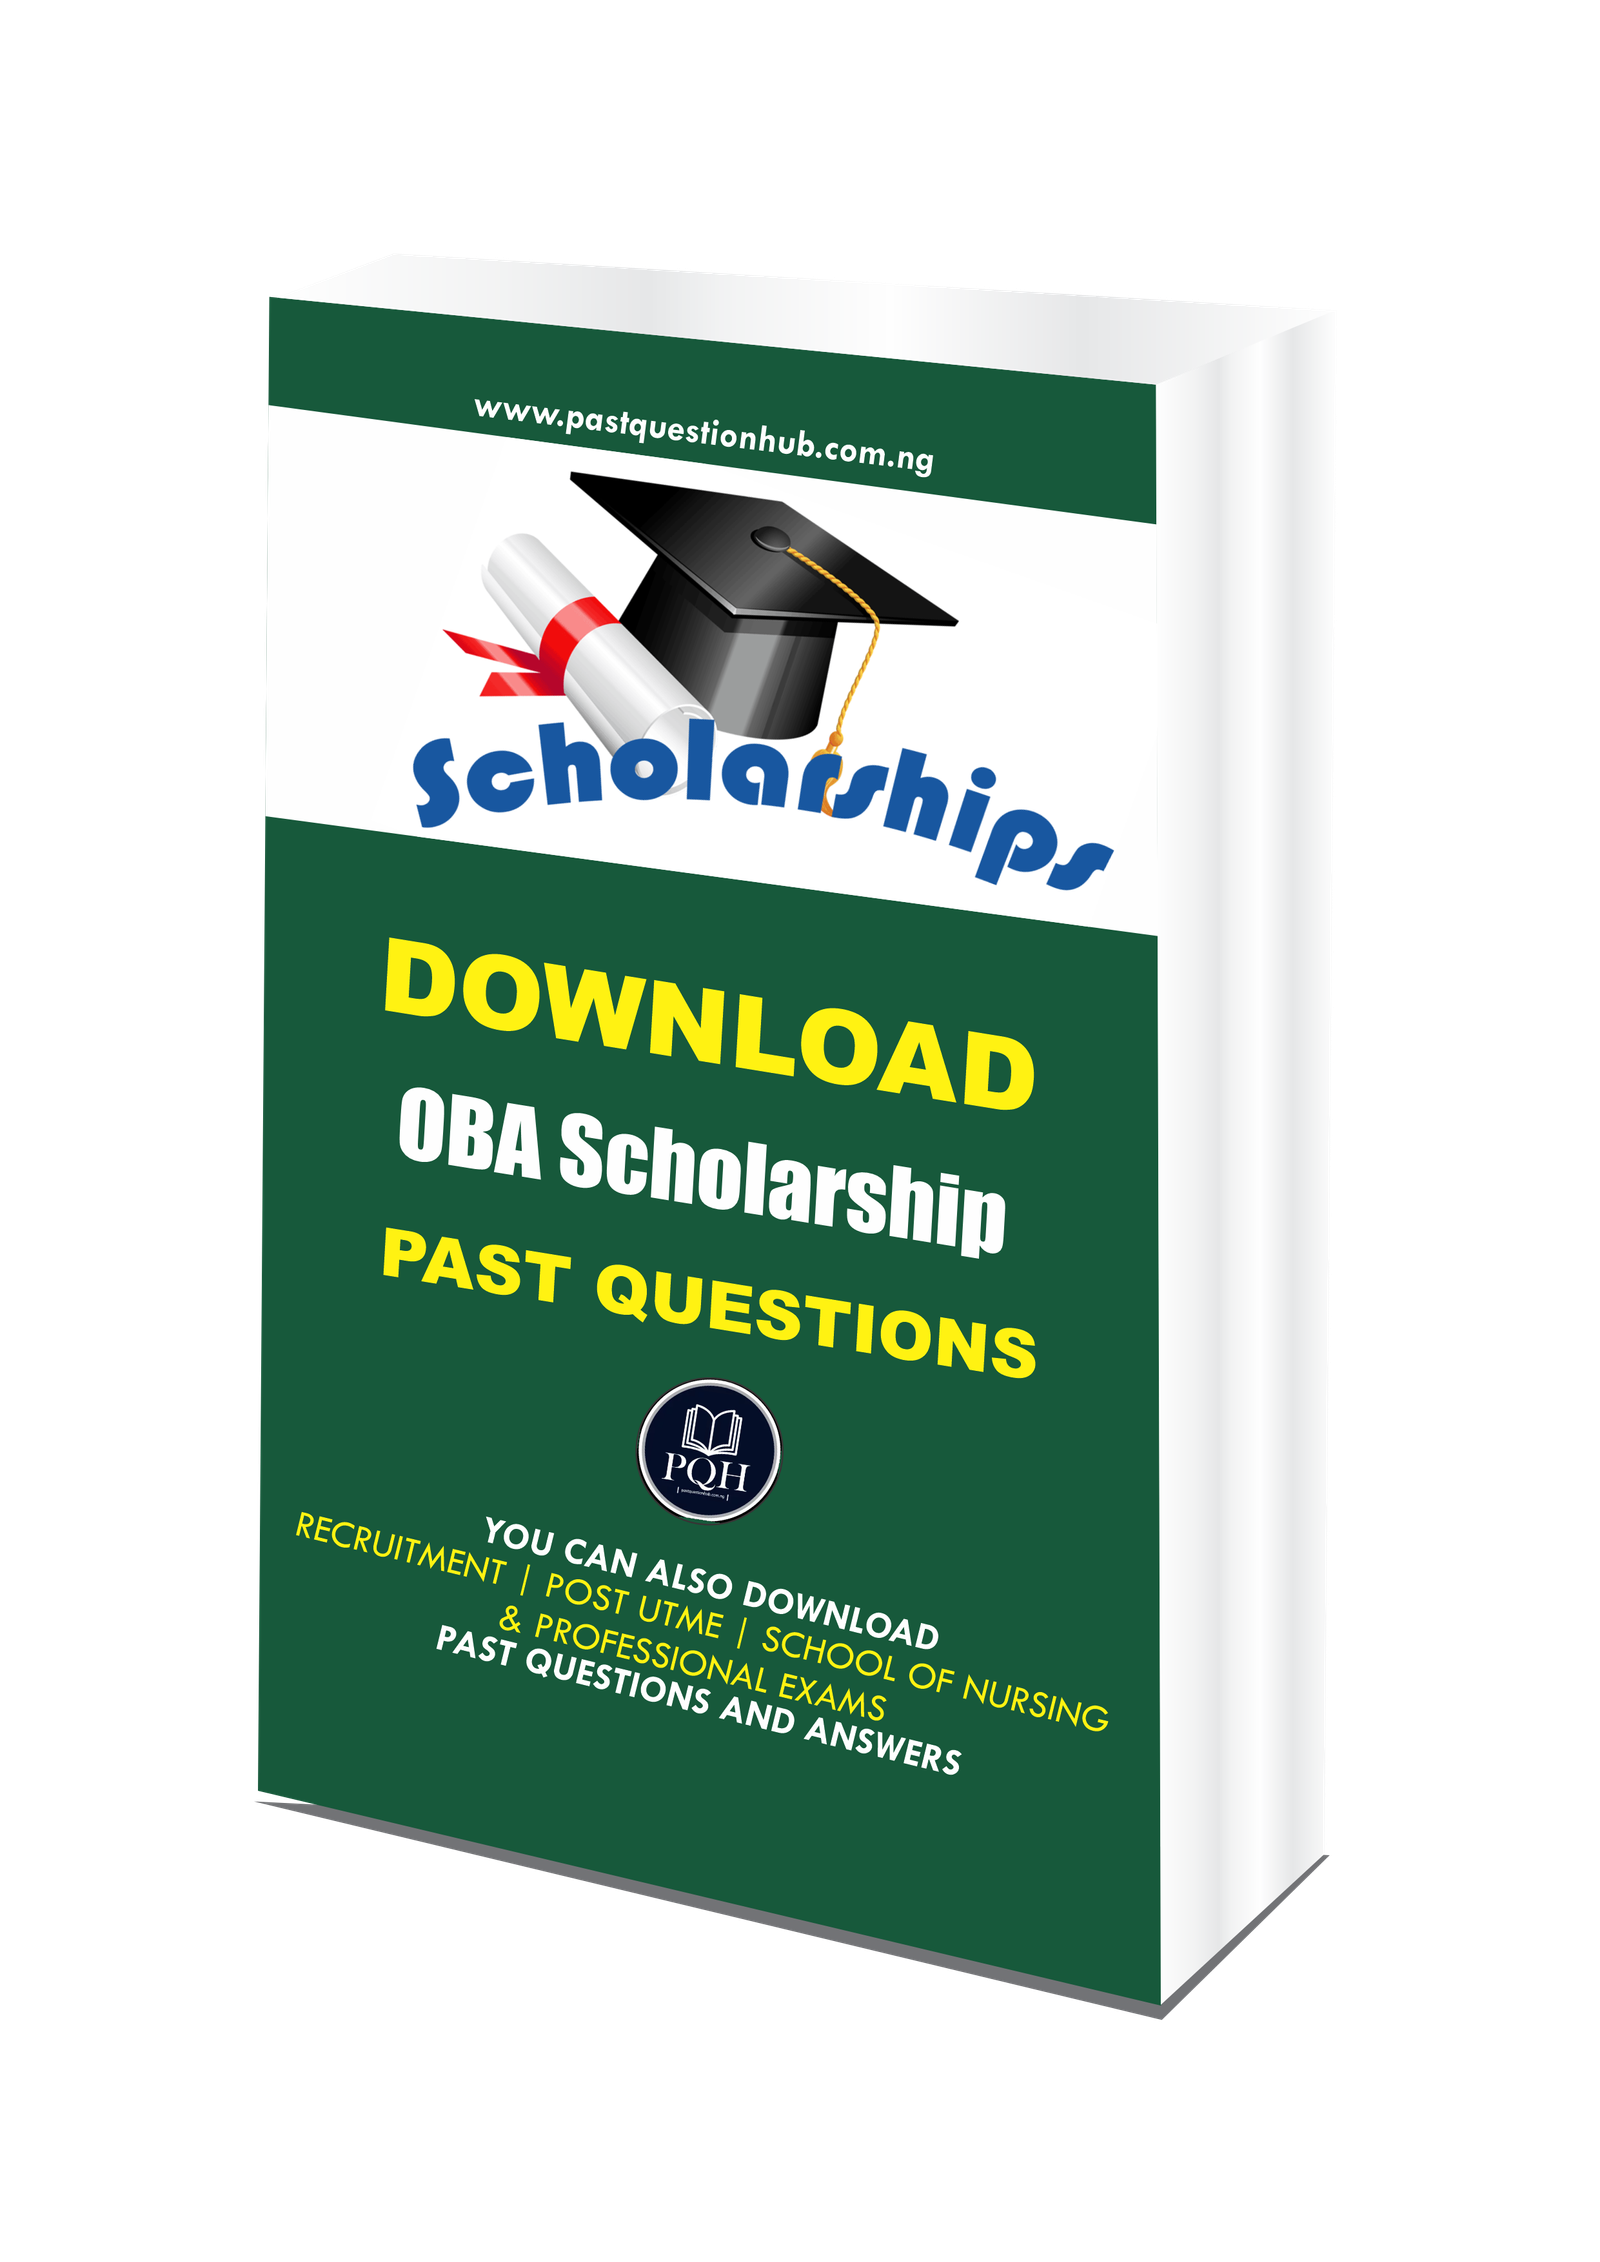 OBA Scholarship Past Questions and Answers PDF